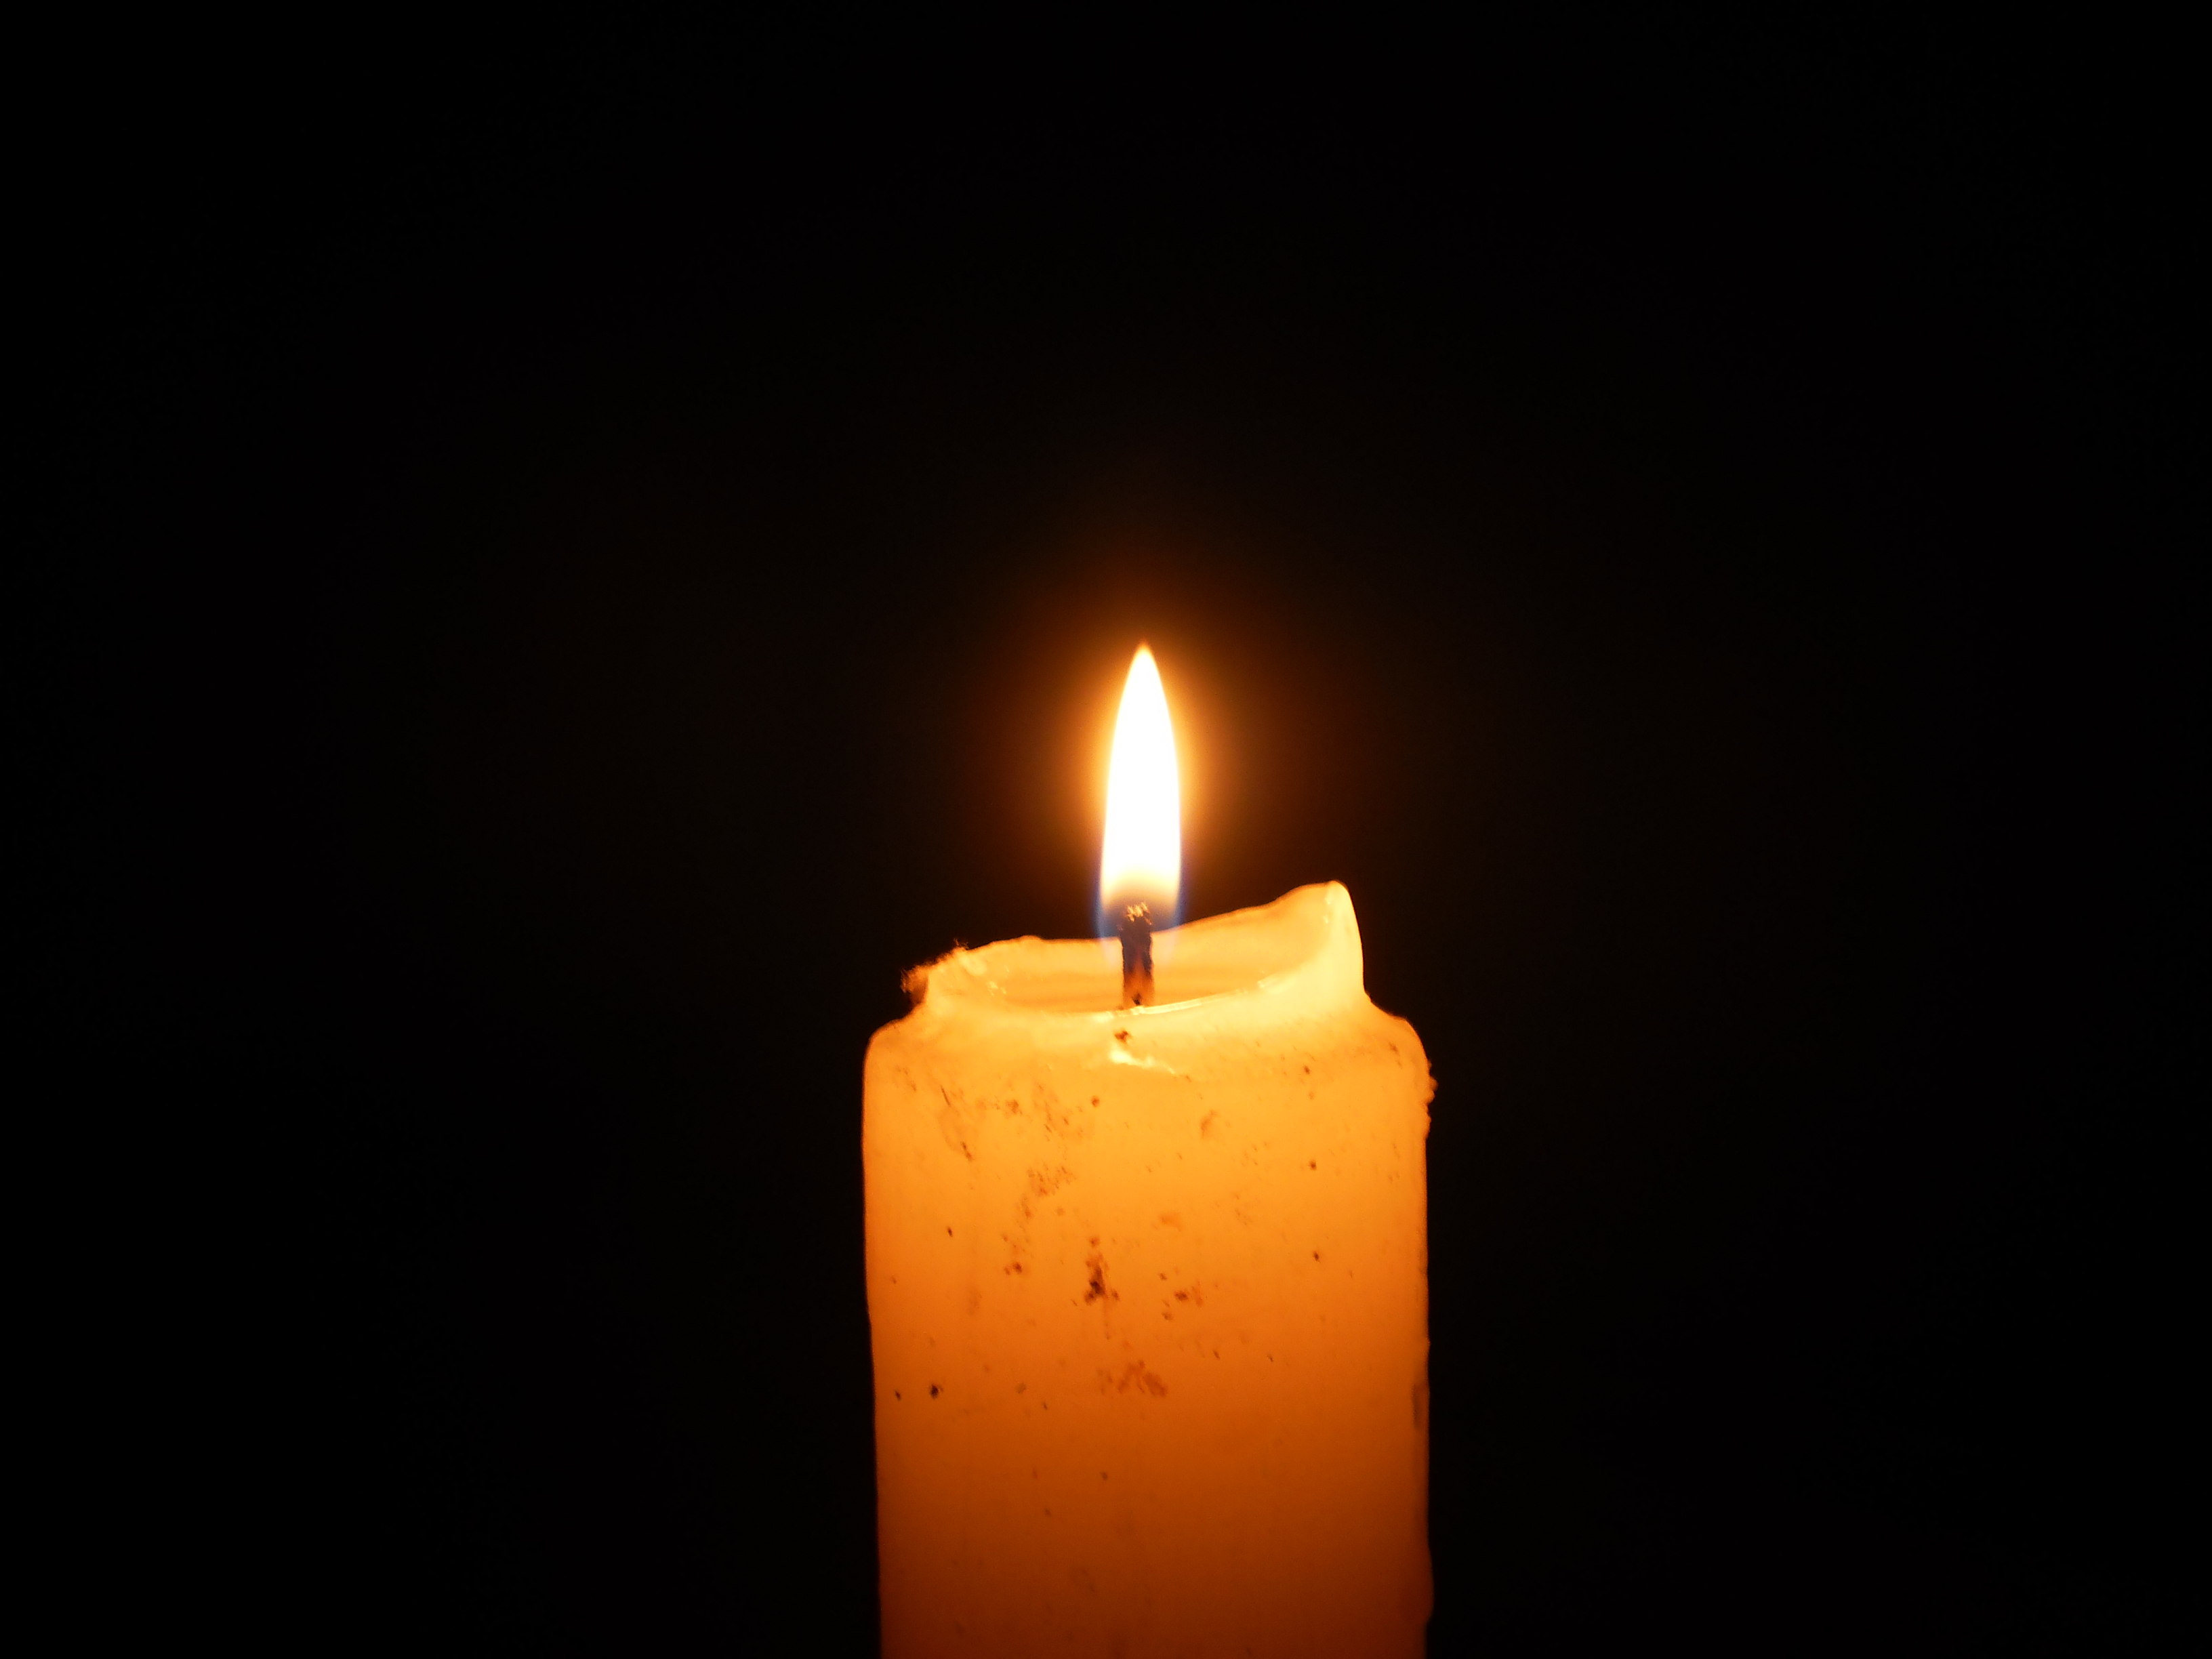 File:Lighted candle at night5.JPG - Wikimedia Commons